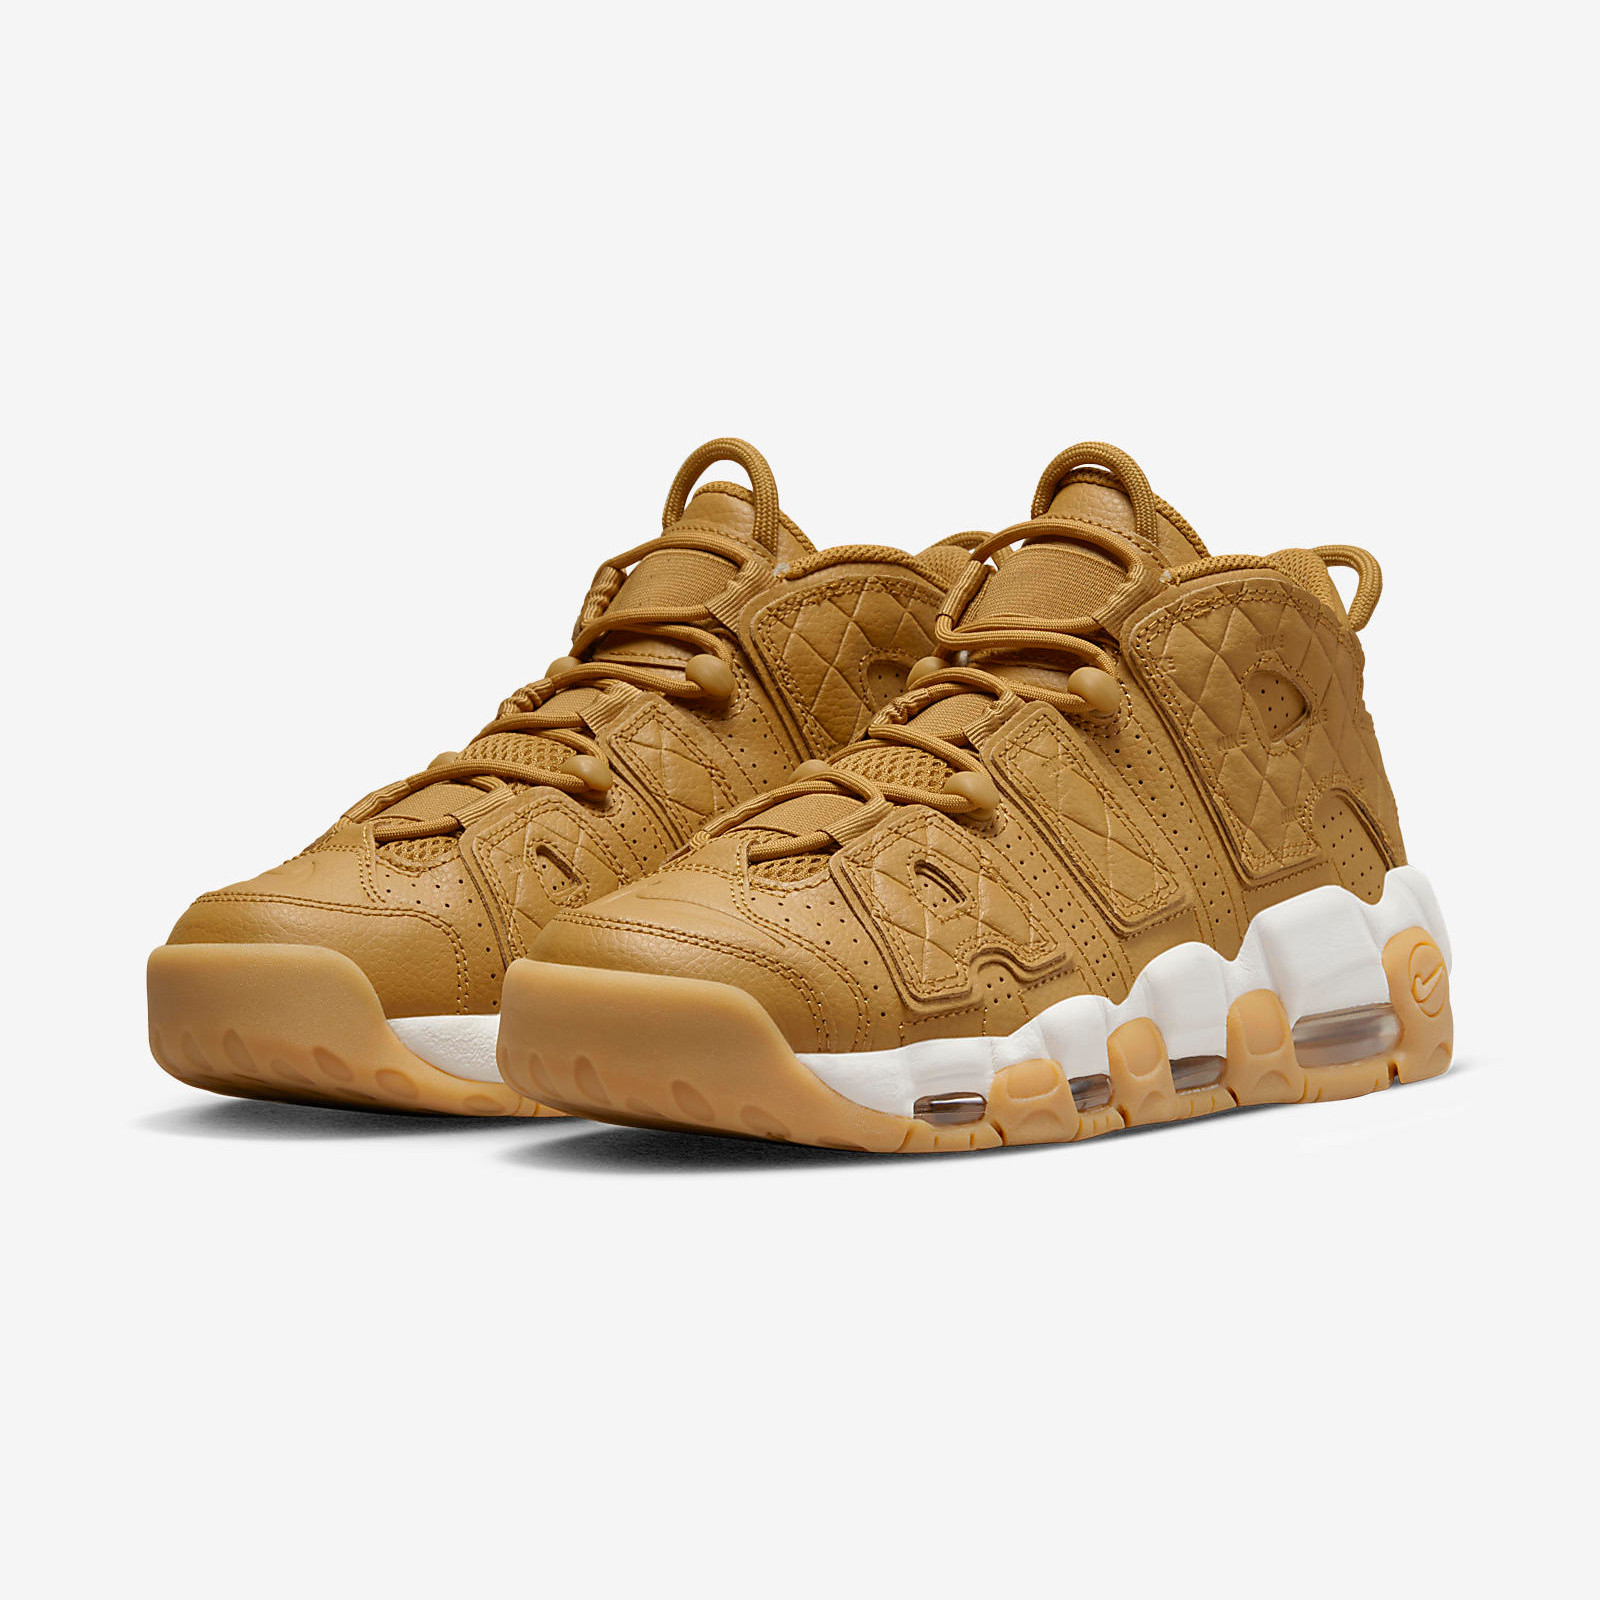 Nike Air More Uptempo
« Wheat »